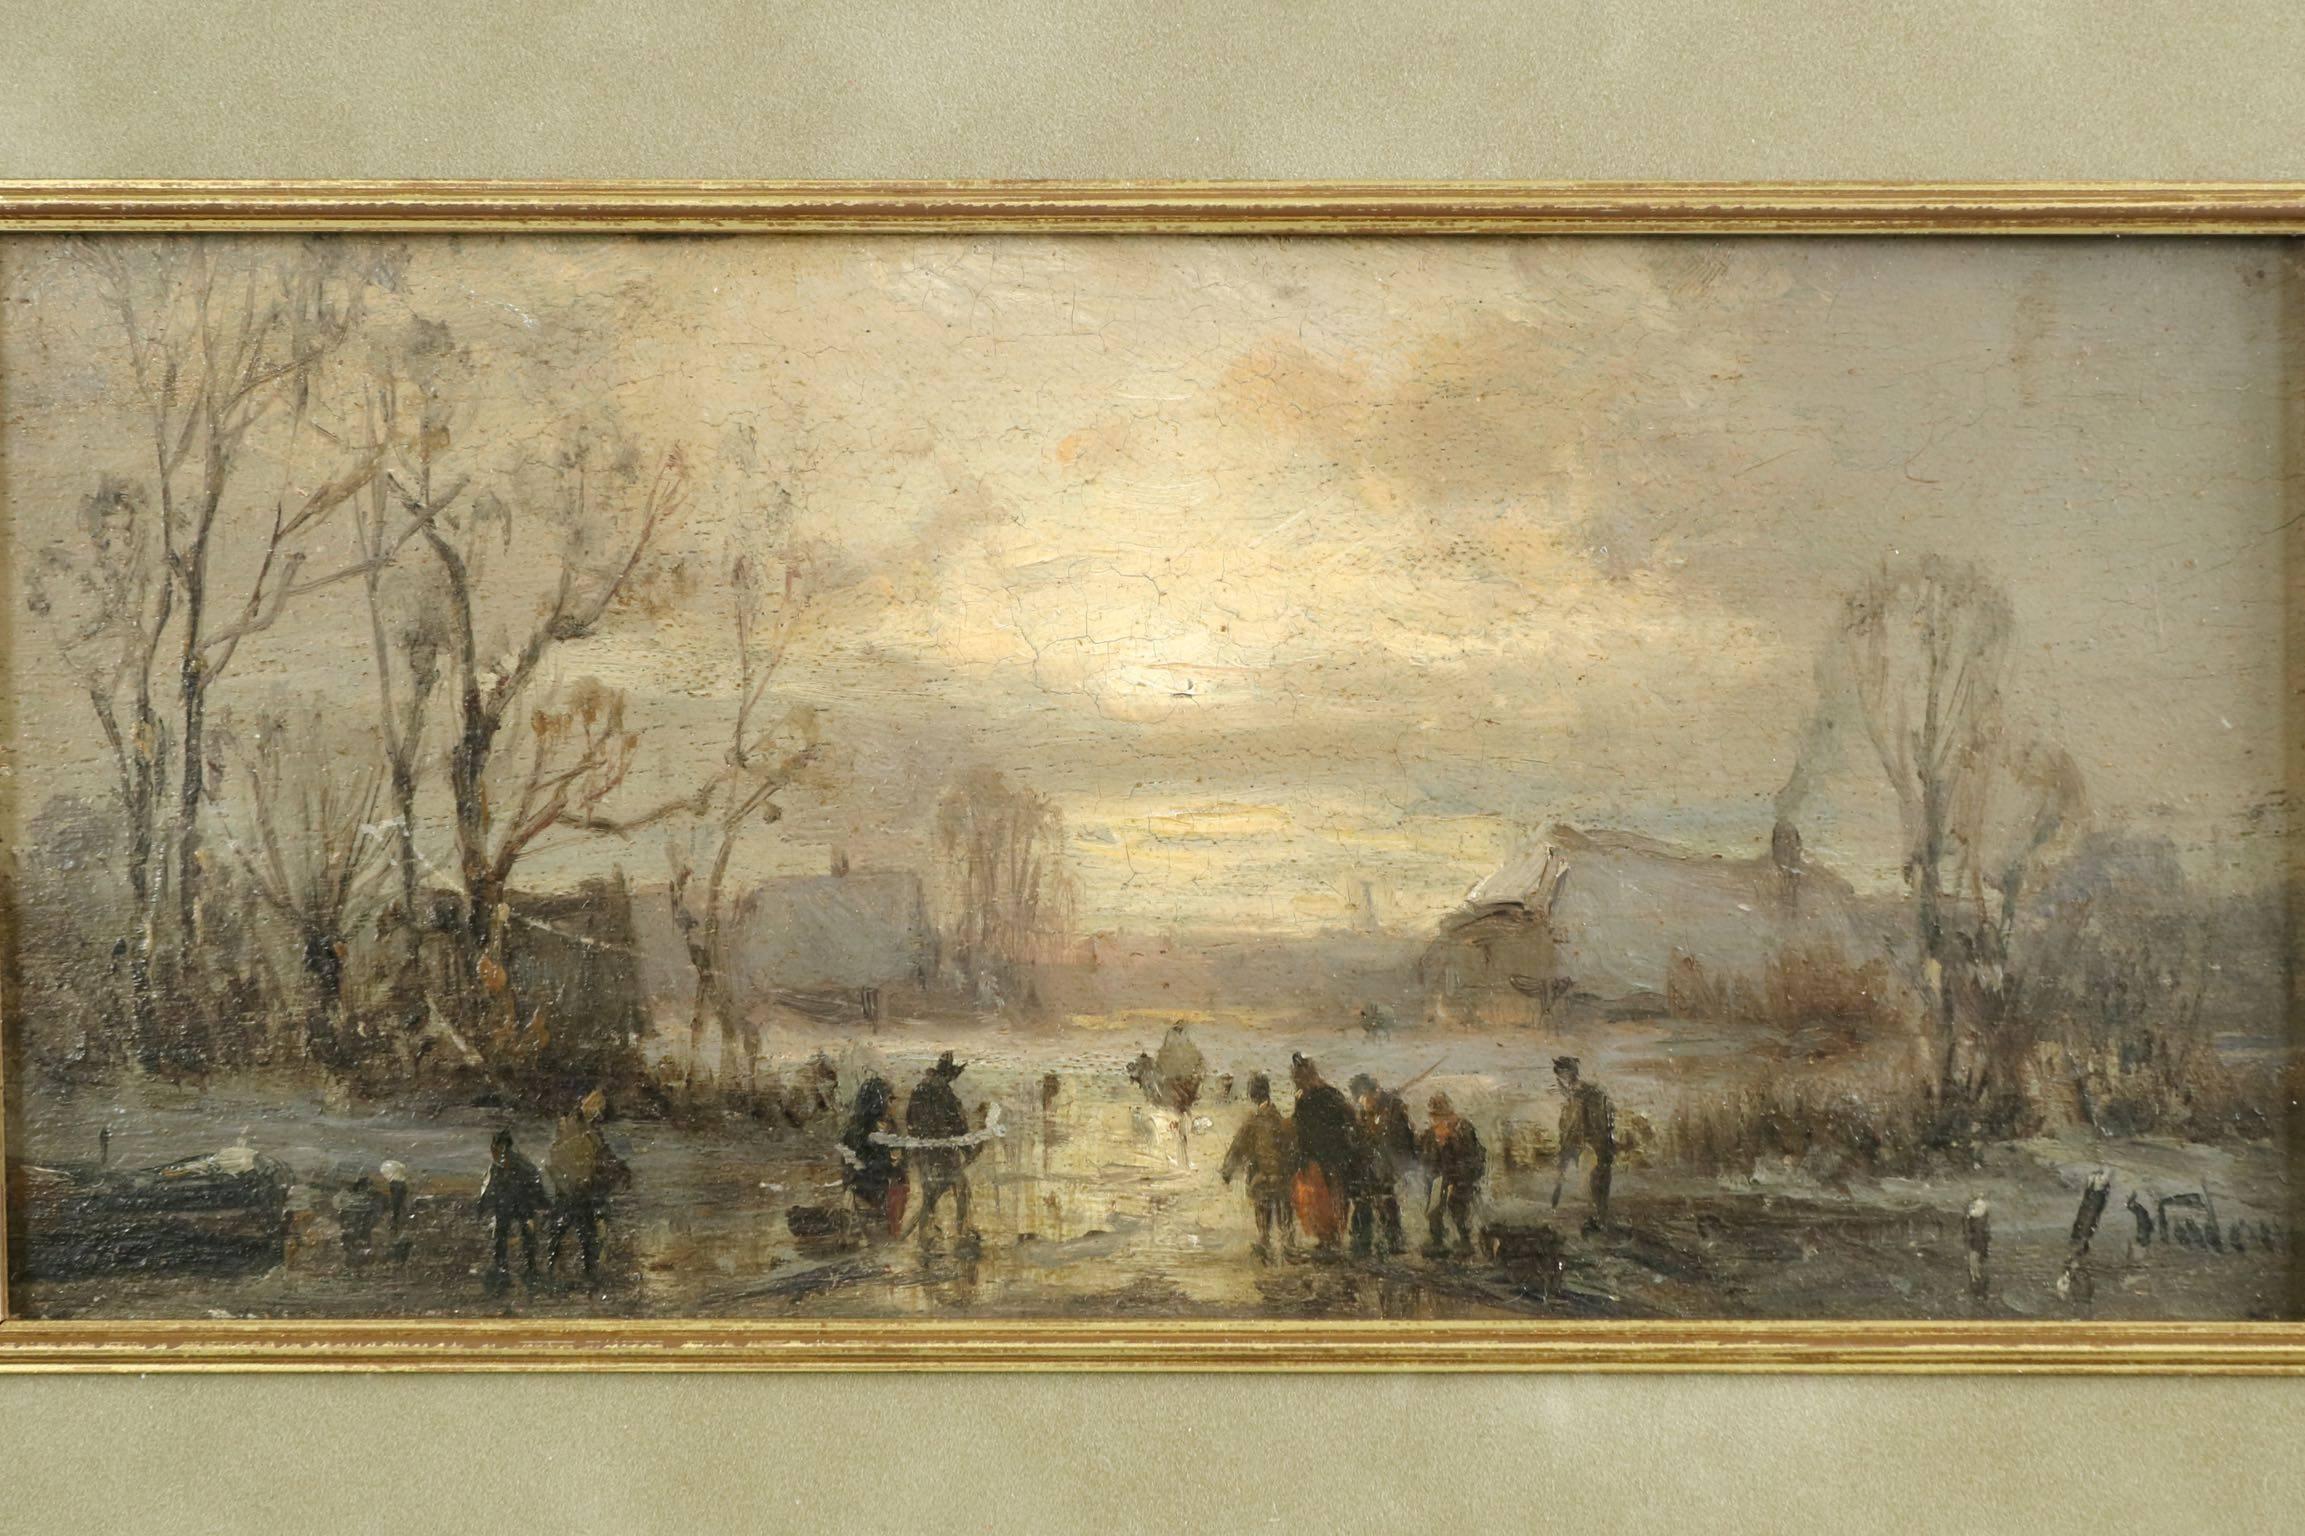 Born to Ferdinand Stademann in Munich June 19, 1824, Adolf studied under Lebschée and Lotze, working the majority of his career in Munich. He specialized in landscape and genre scenes, but focused primarily on nostalgic winterscapes, often capturing